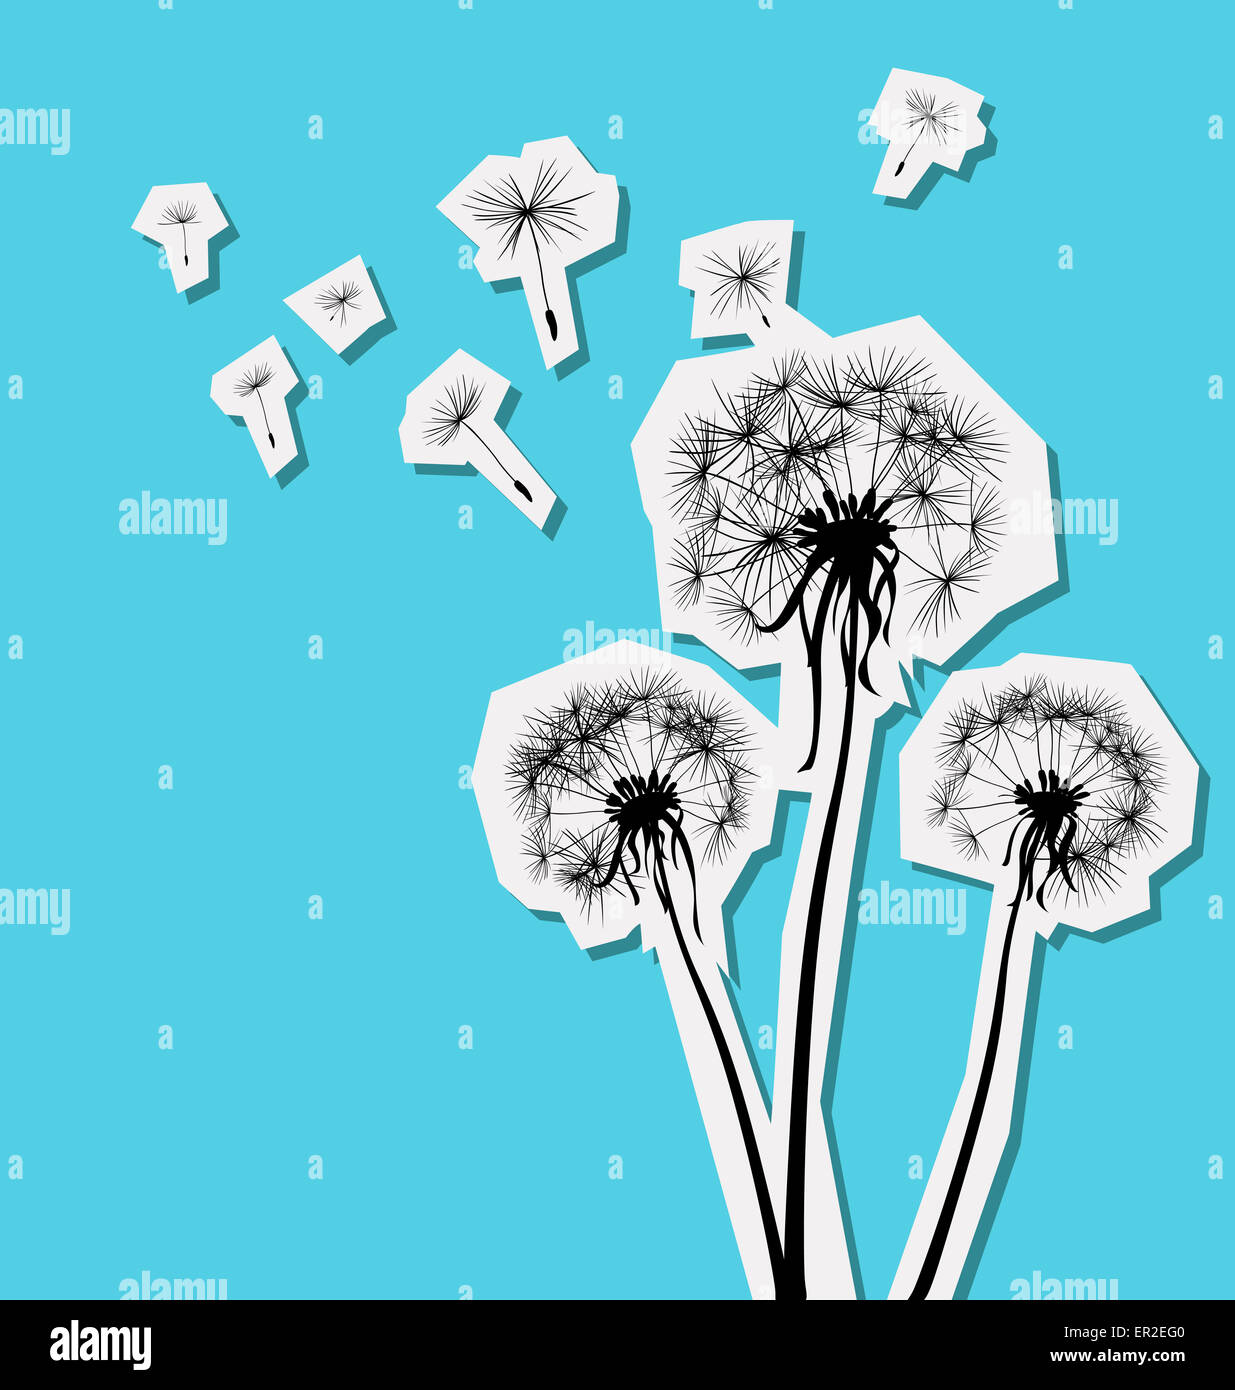 silhouettes of three dandelions in the wind Stock Photo